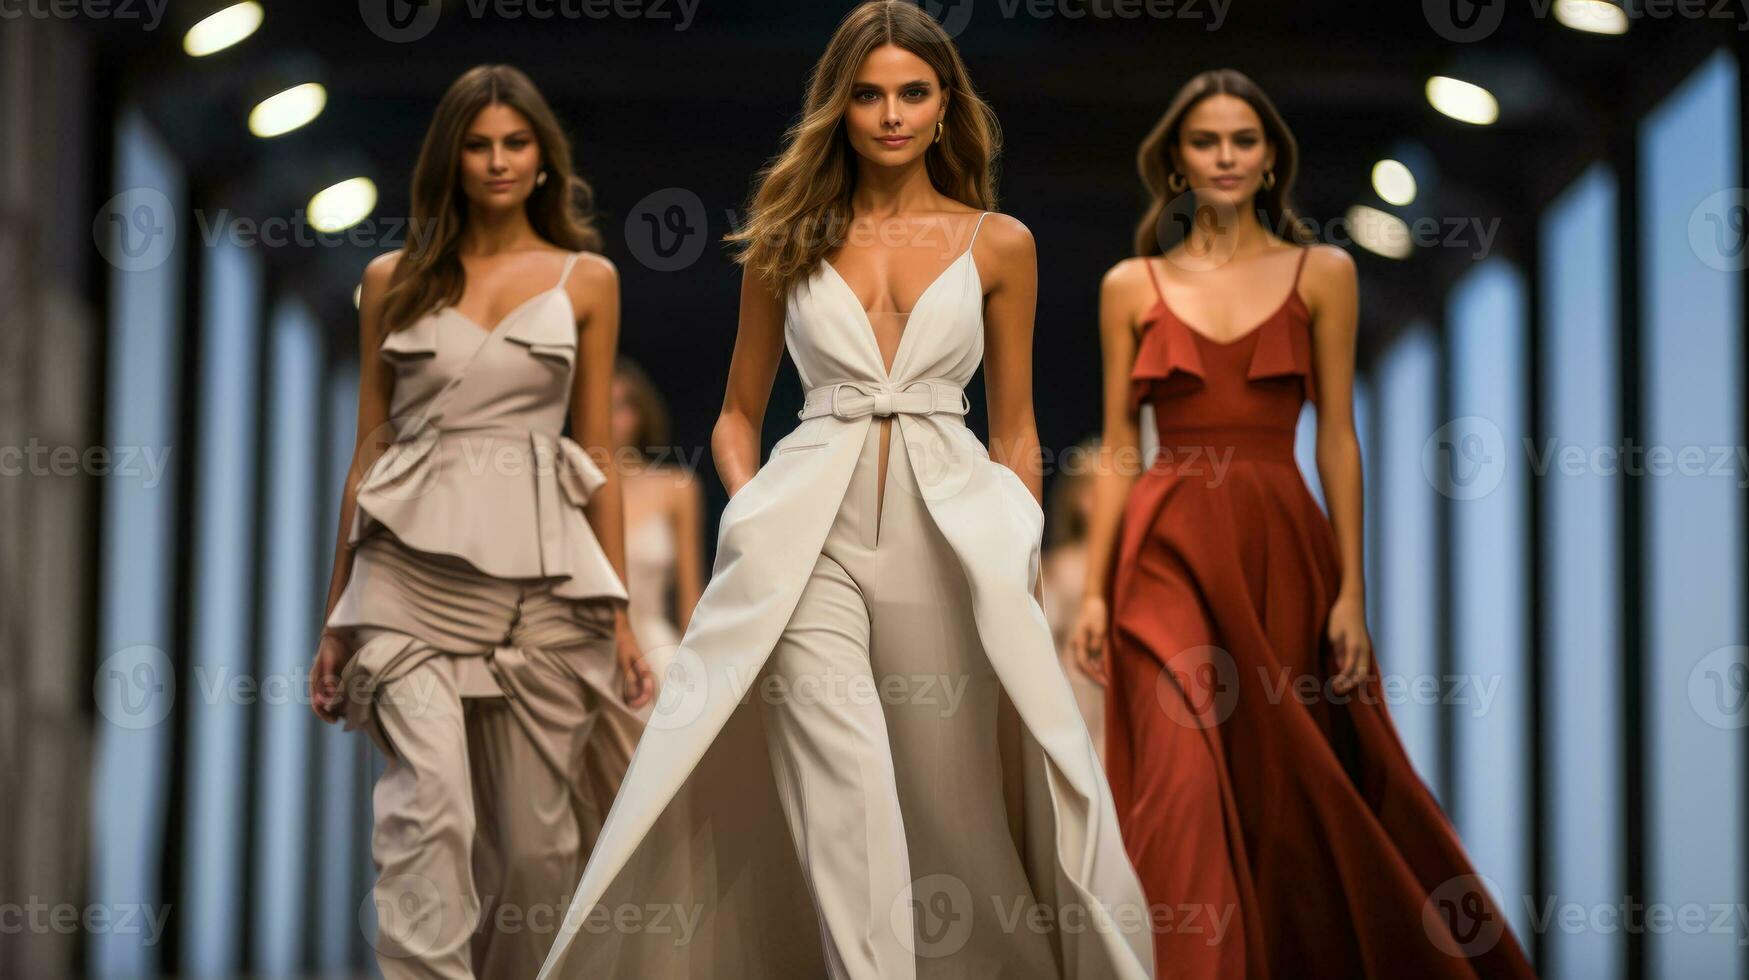 Models strut down the runway wearing modern couture designs captivating the audience with their elegance and style photo